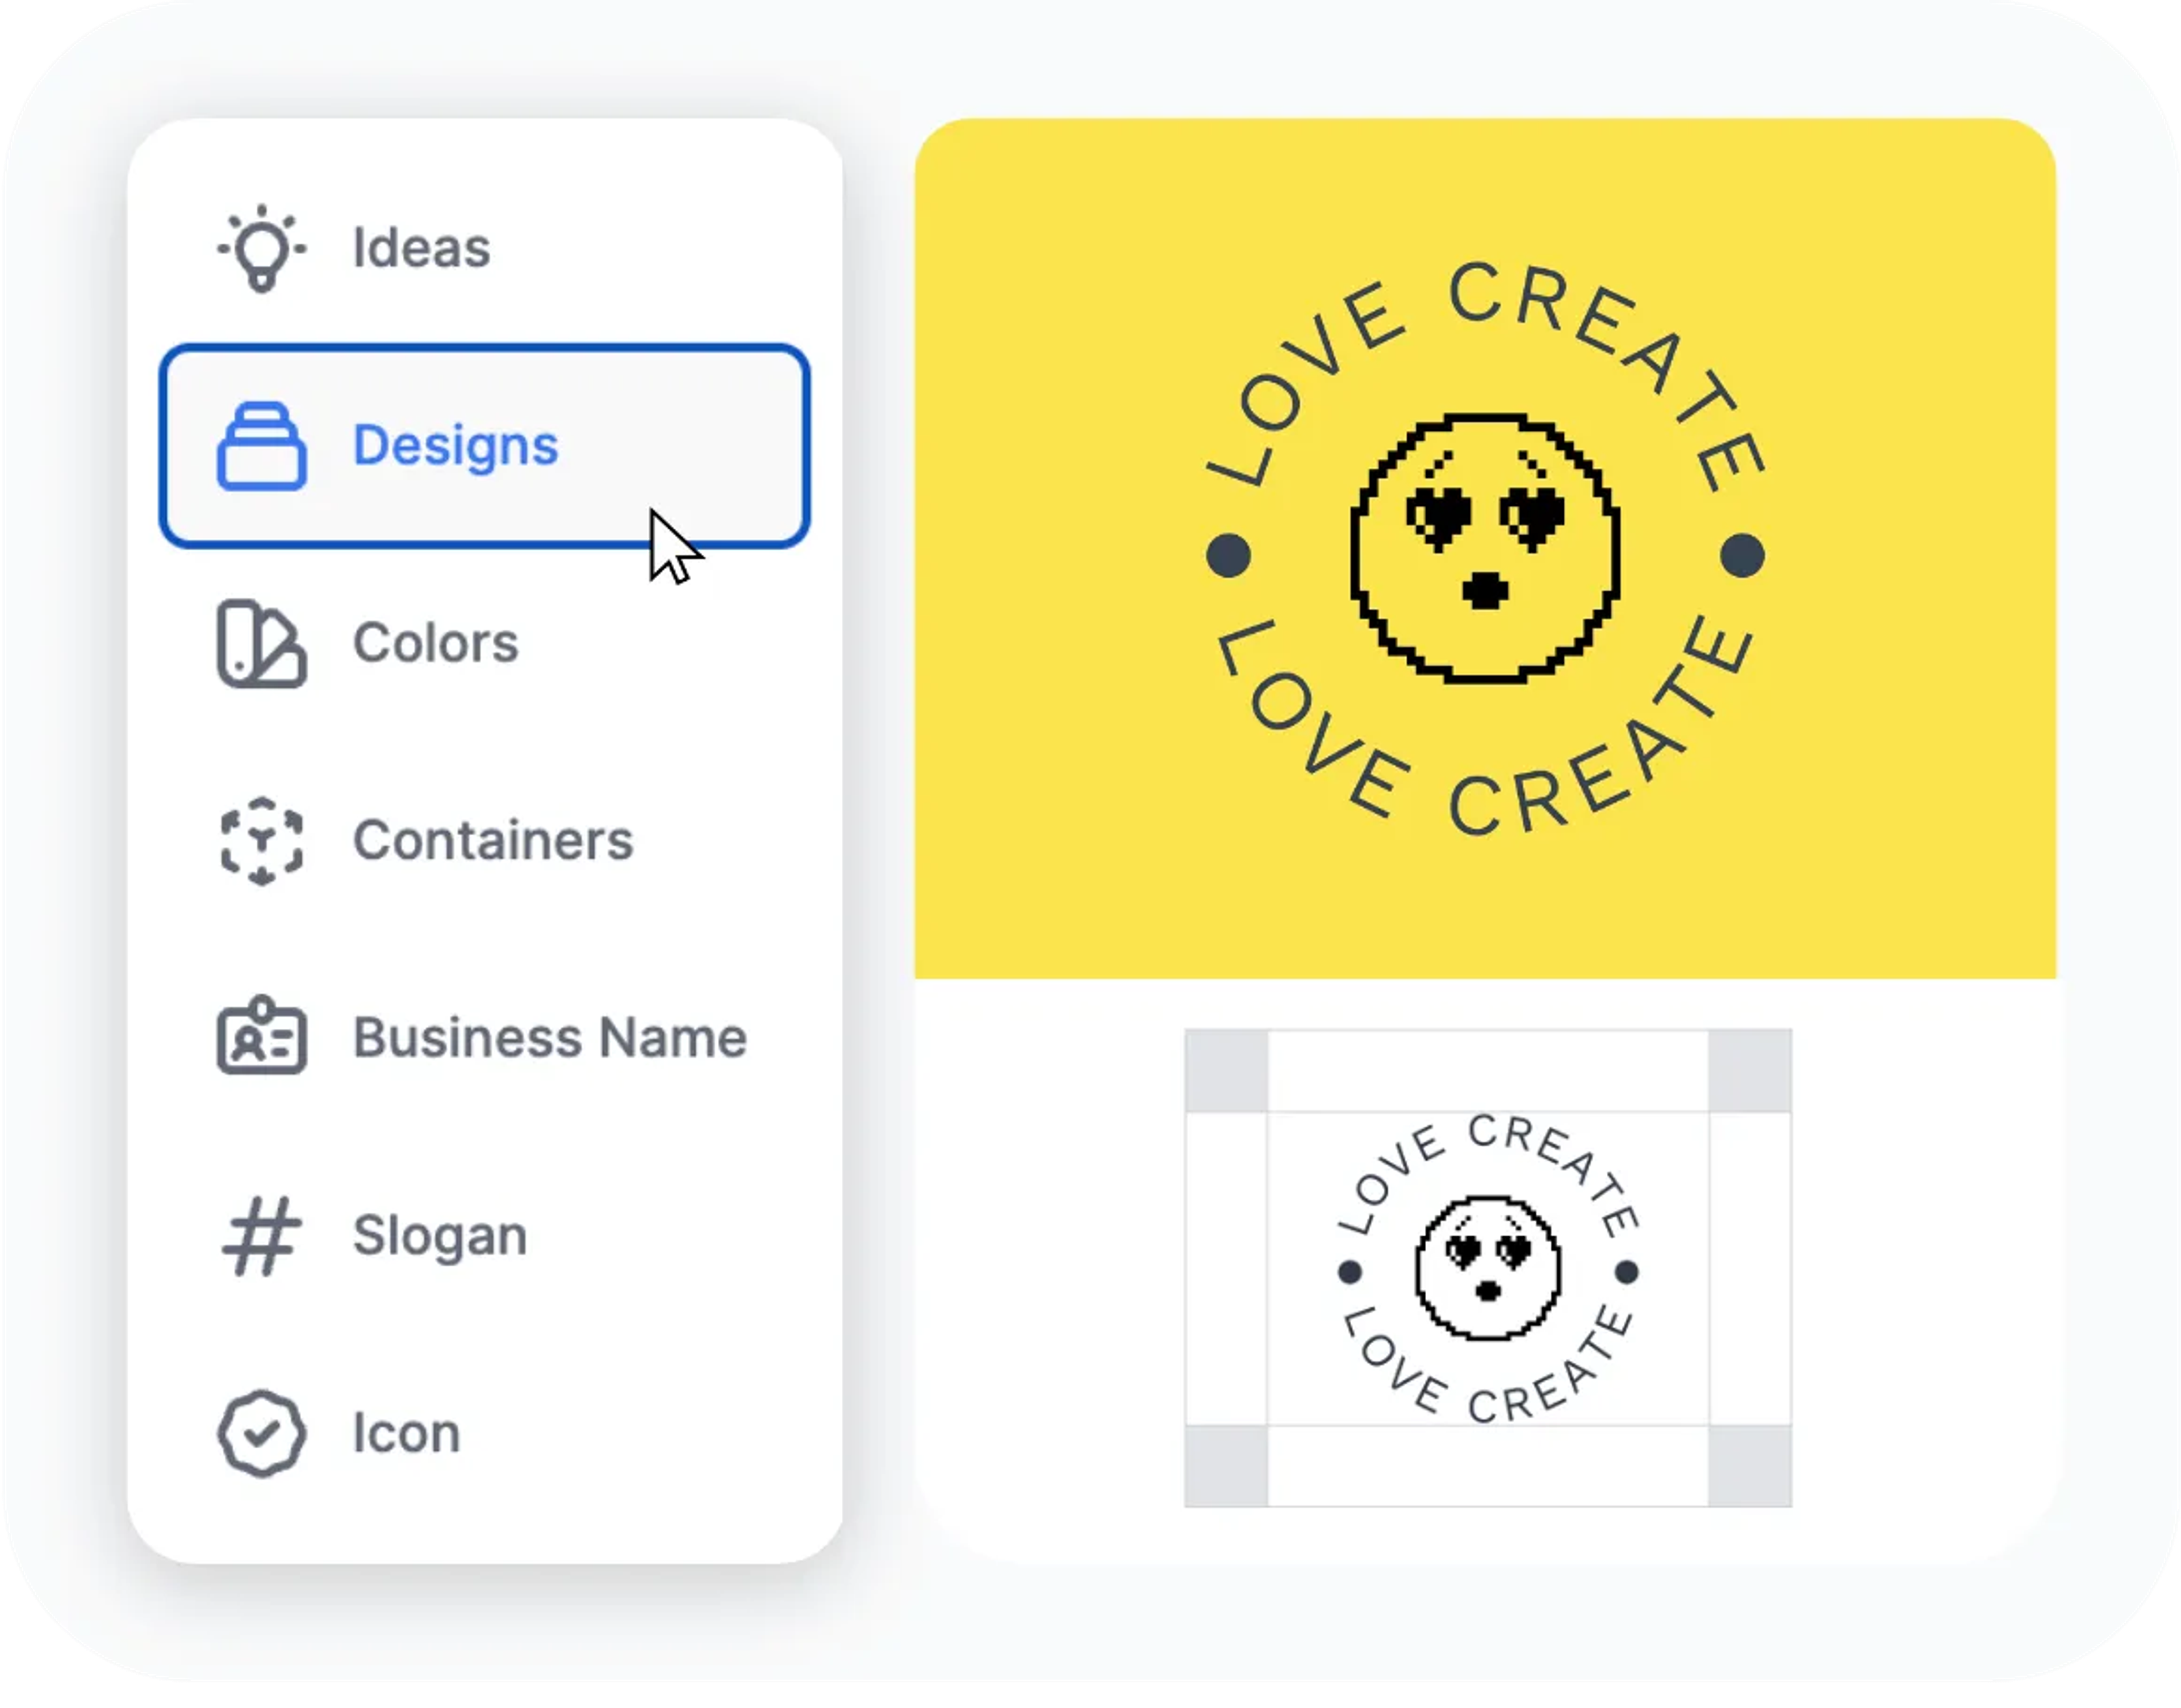 Step 1: Create and download your free logo.